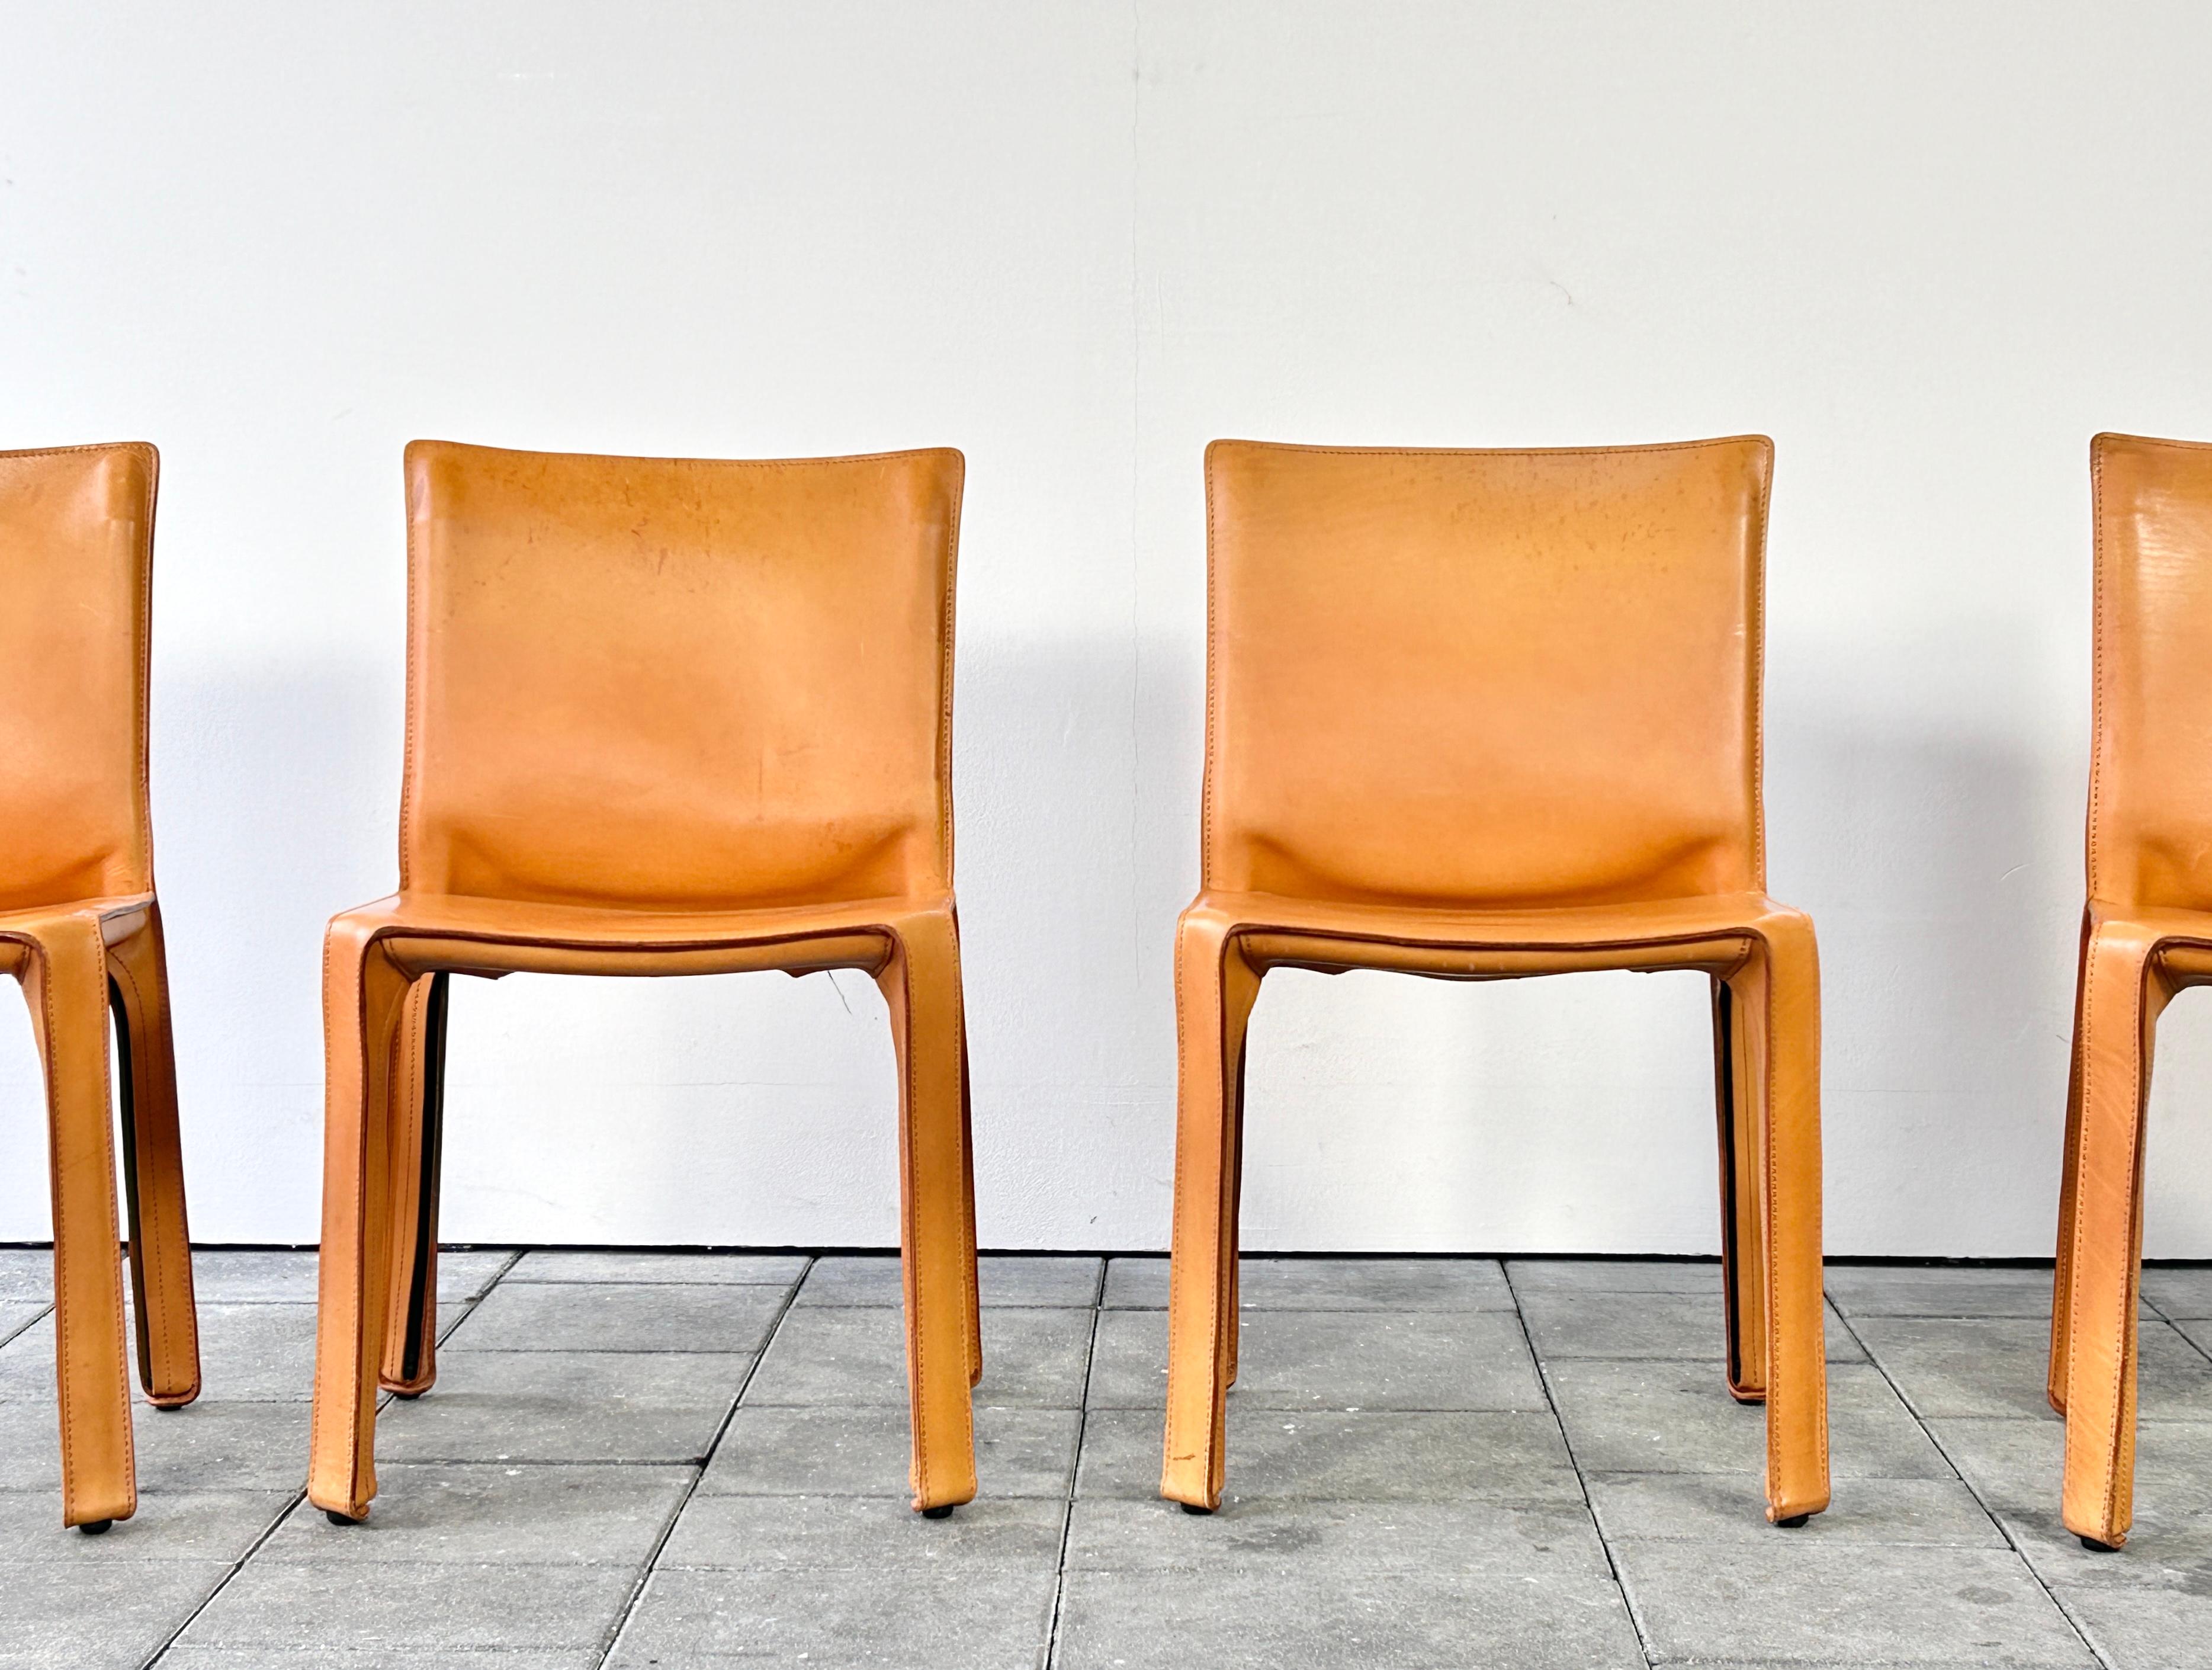 Post-Modern Set of 4 Cassina Cab Chairs designed by Mario Bellini 1978 in Natural Leather